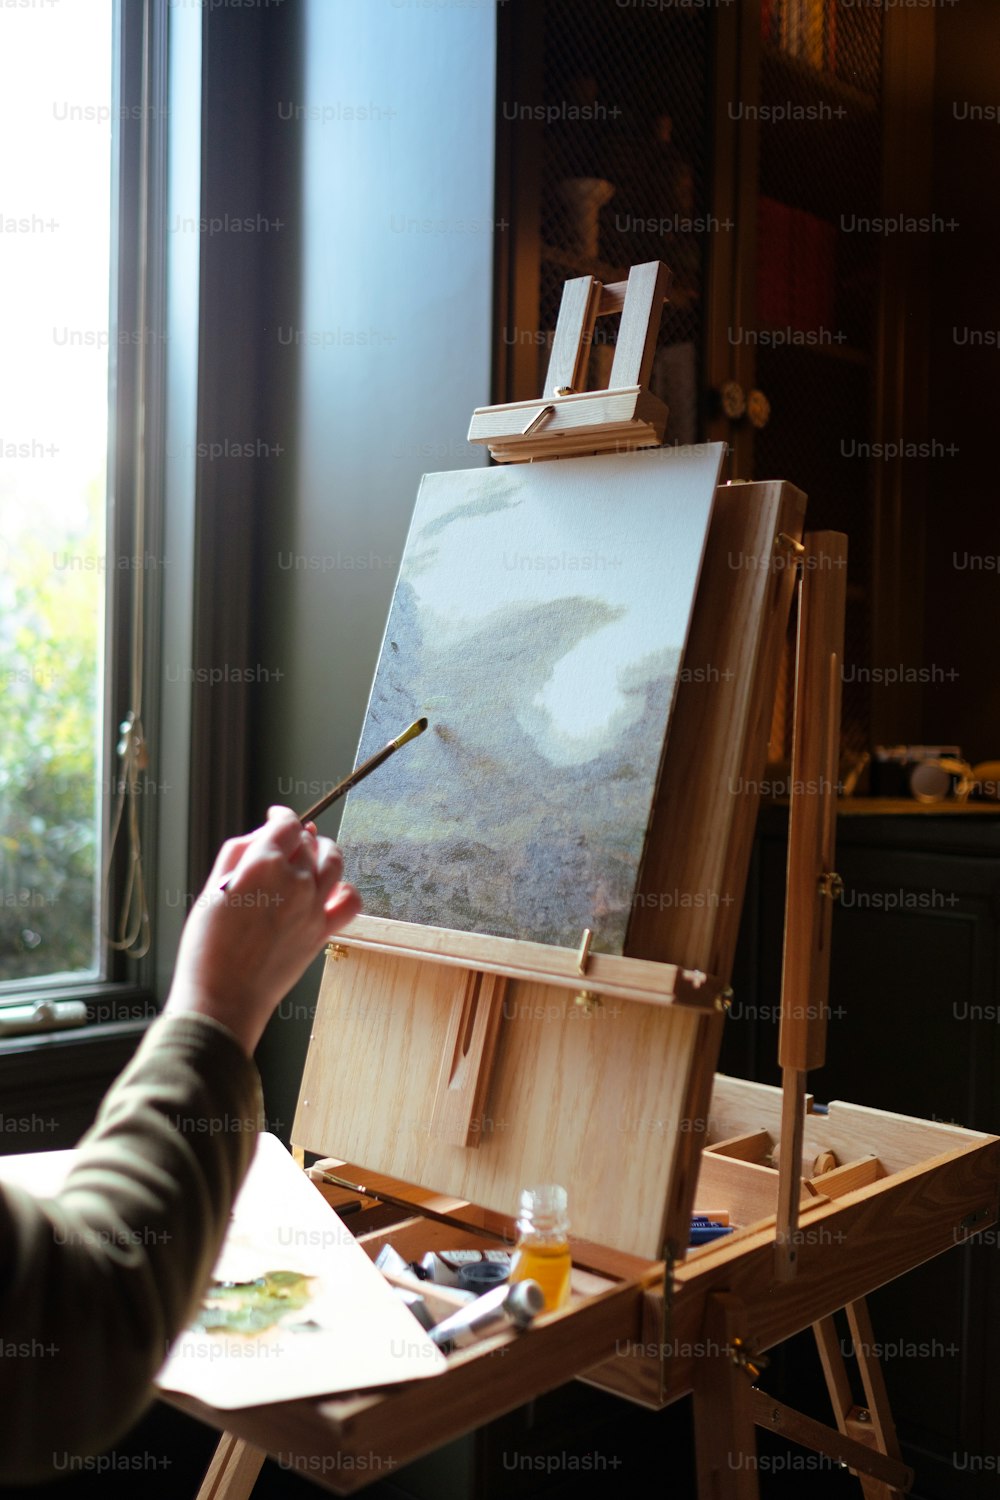 a person holding a paintbrush in front of an easel